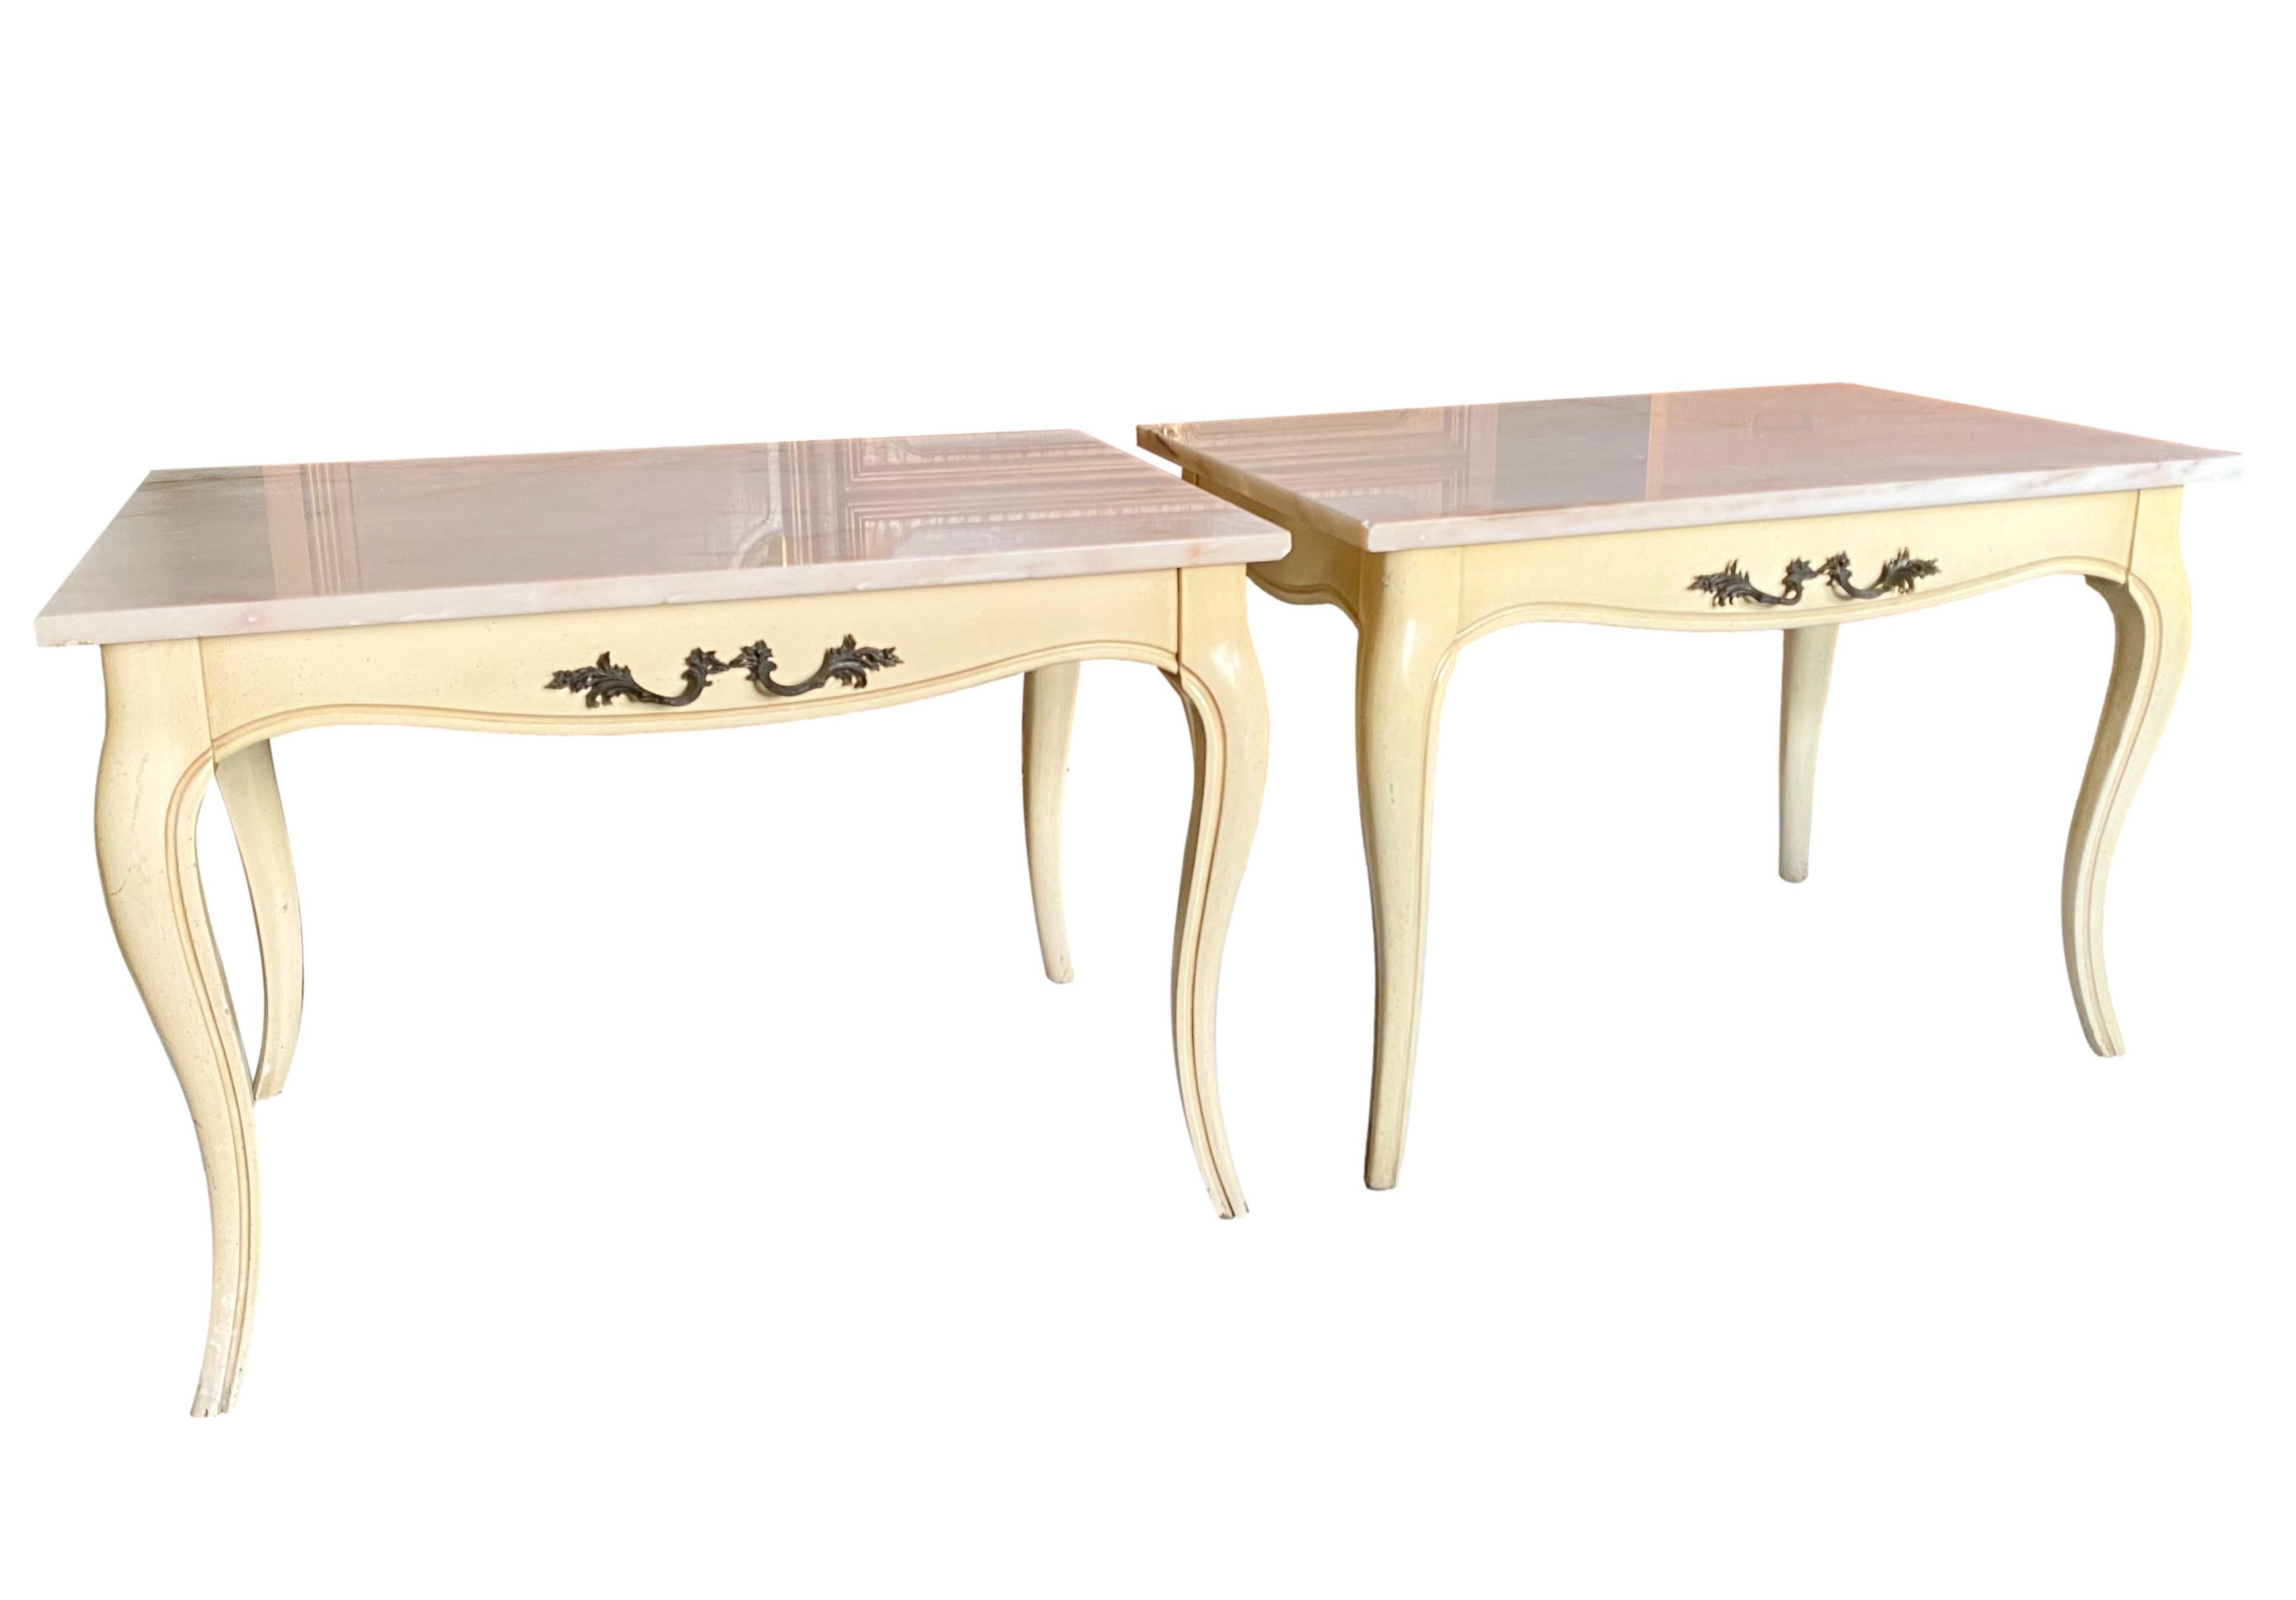 A vintage pair of French Louis XV style marble top accent tables. Cream painted wood frames featuring cabriole legs, channeled edge details and front/back faux drawer handles in bronze. Marble tops are an off-white shade with veins of amber, peach